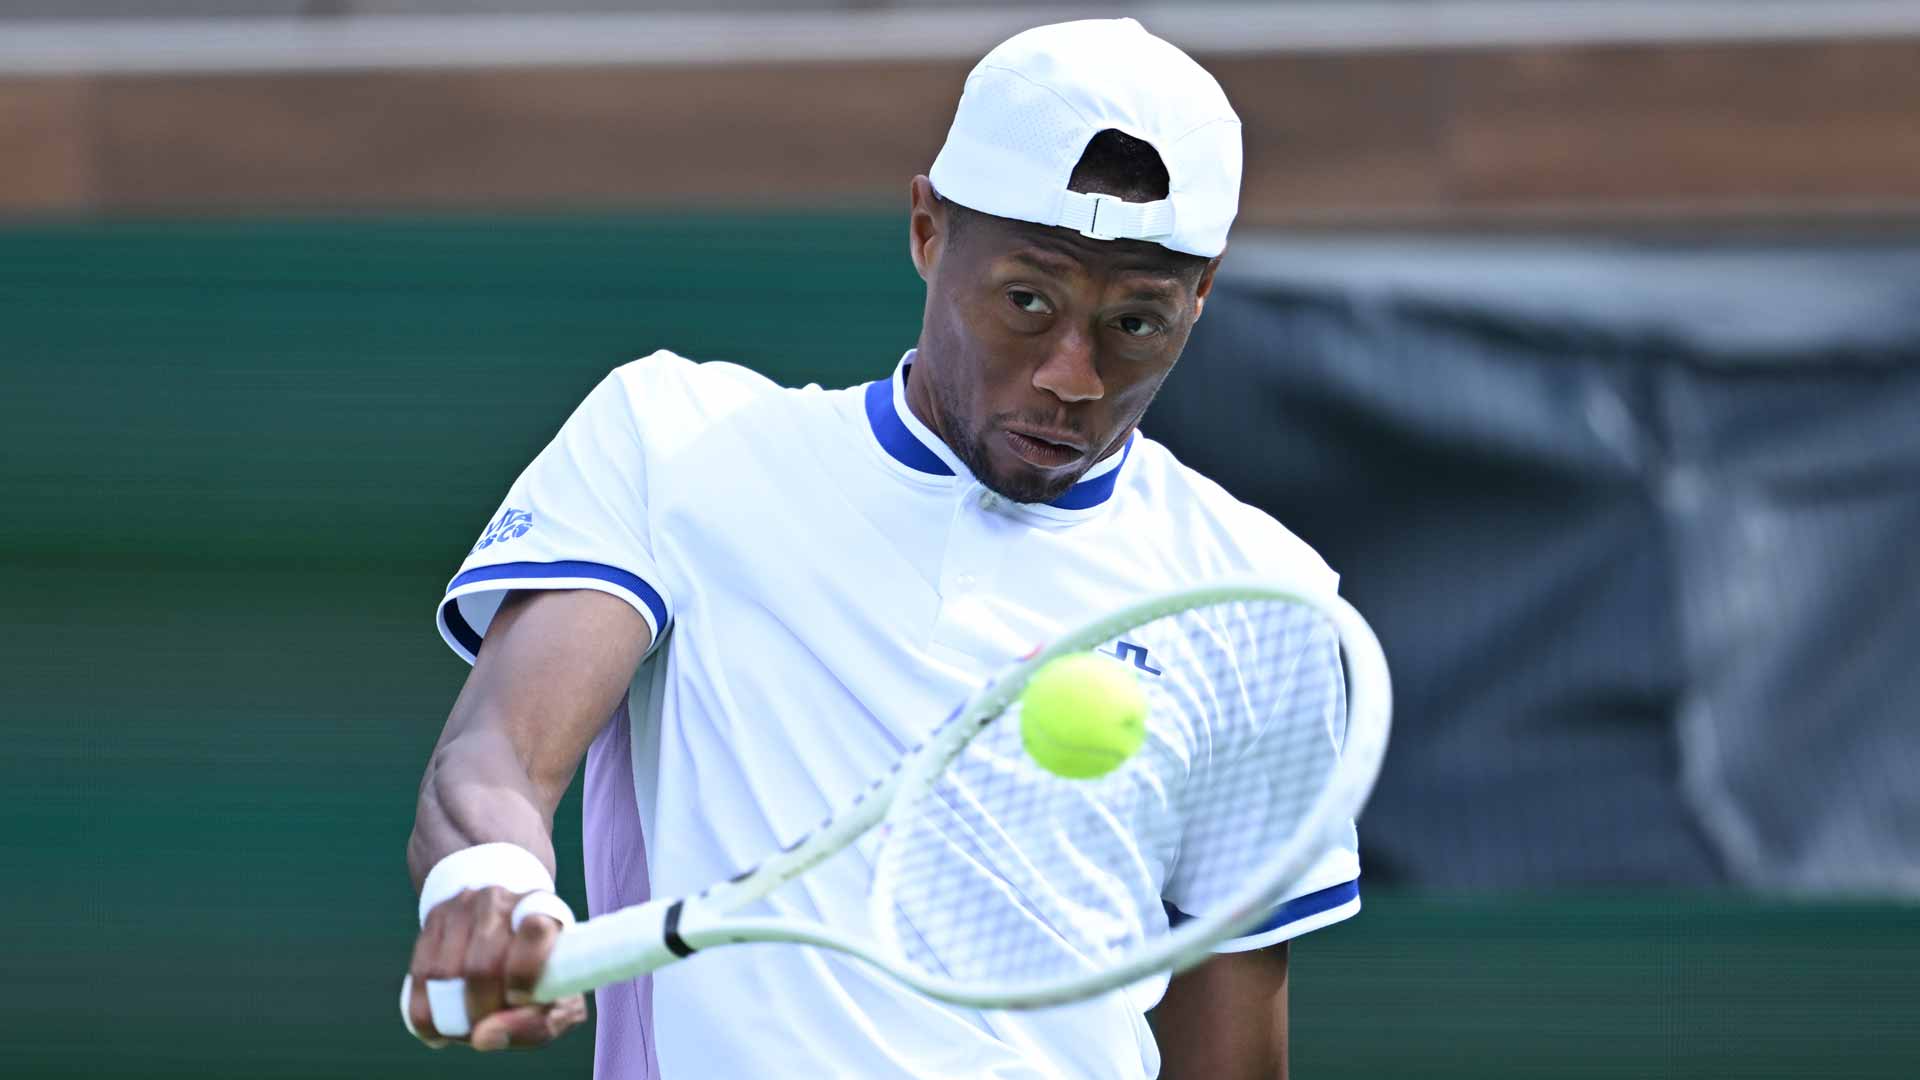 Christopher Eubanks is the top seed at the Arizona Tennis Classic.